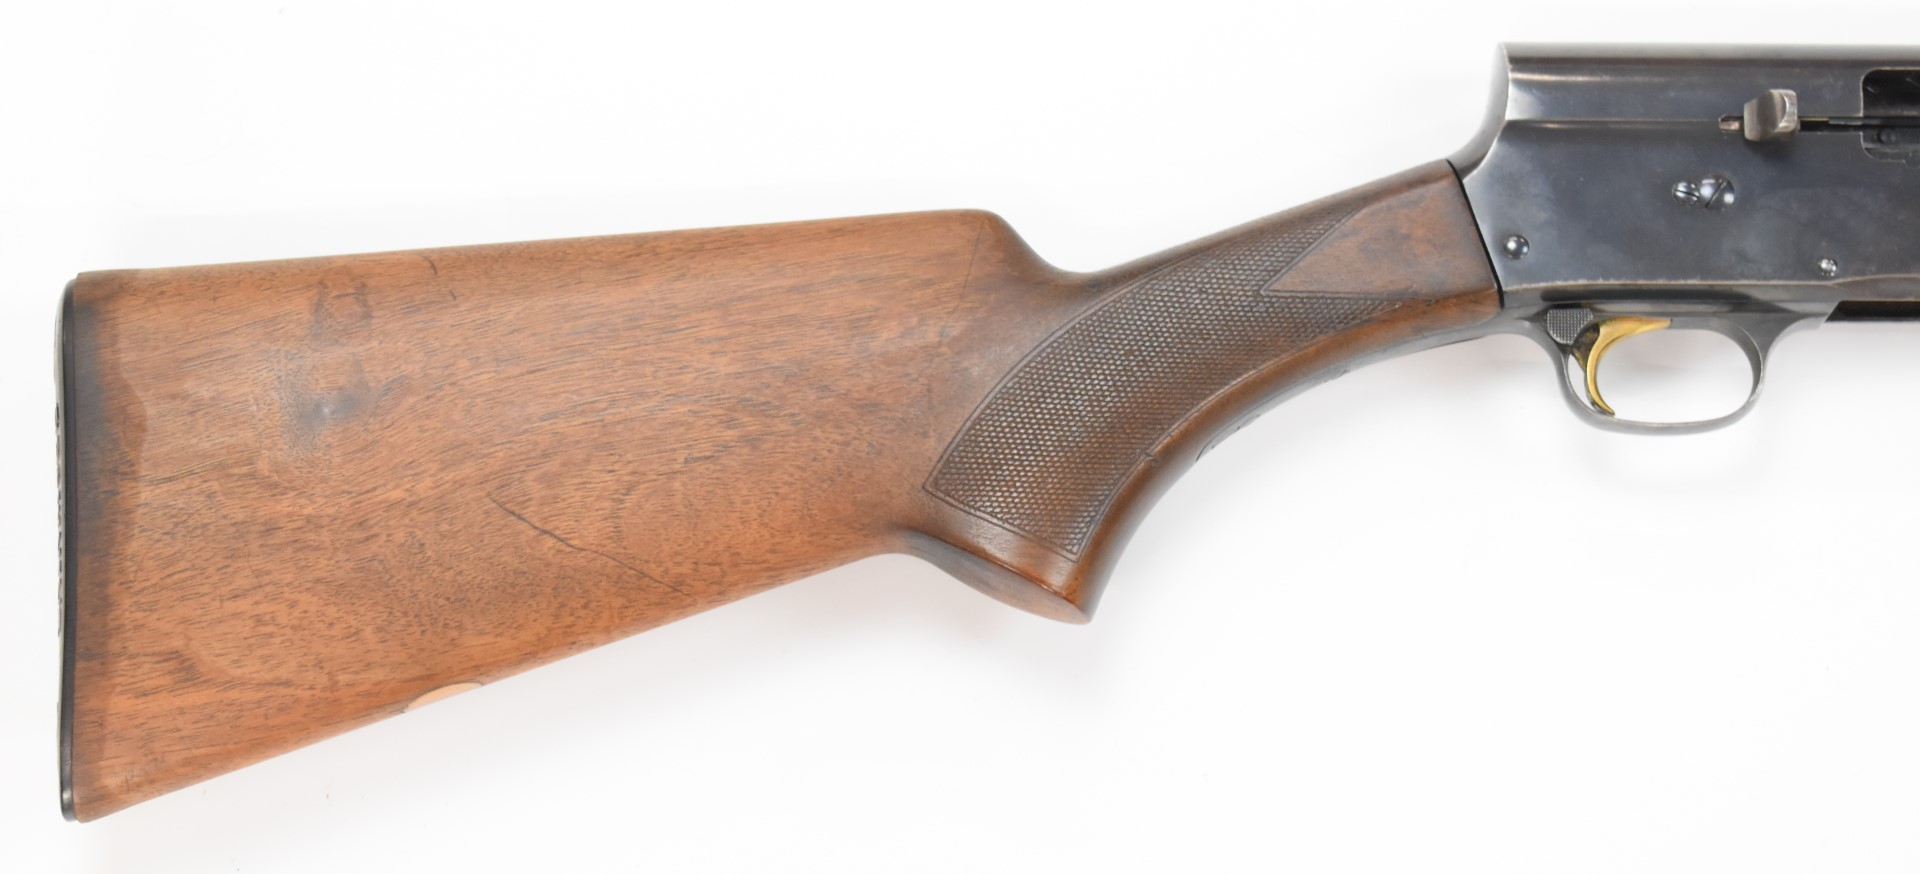 Browning 16 bore 3-shot semi-automatic shotgun with chequered semi-pistol grip and forend and 27 - Image 5 of 18